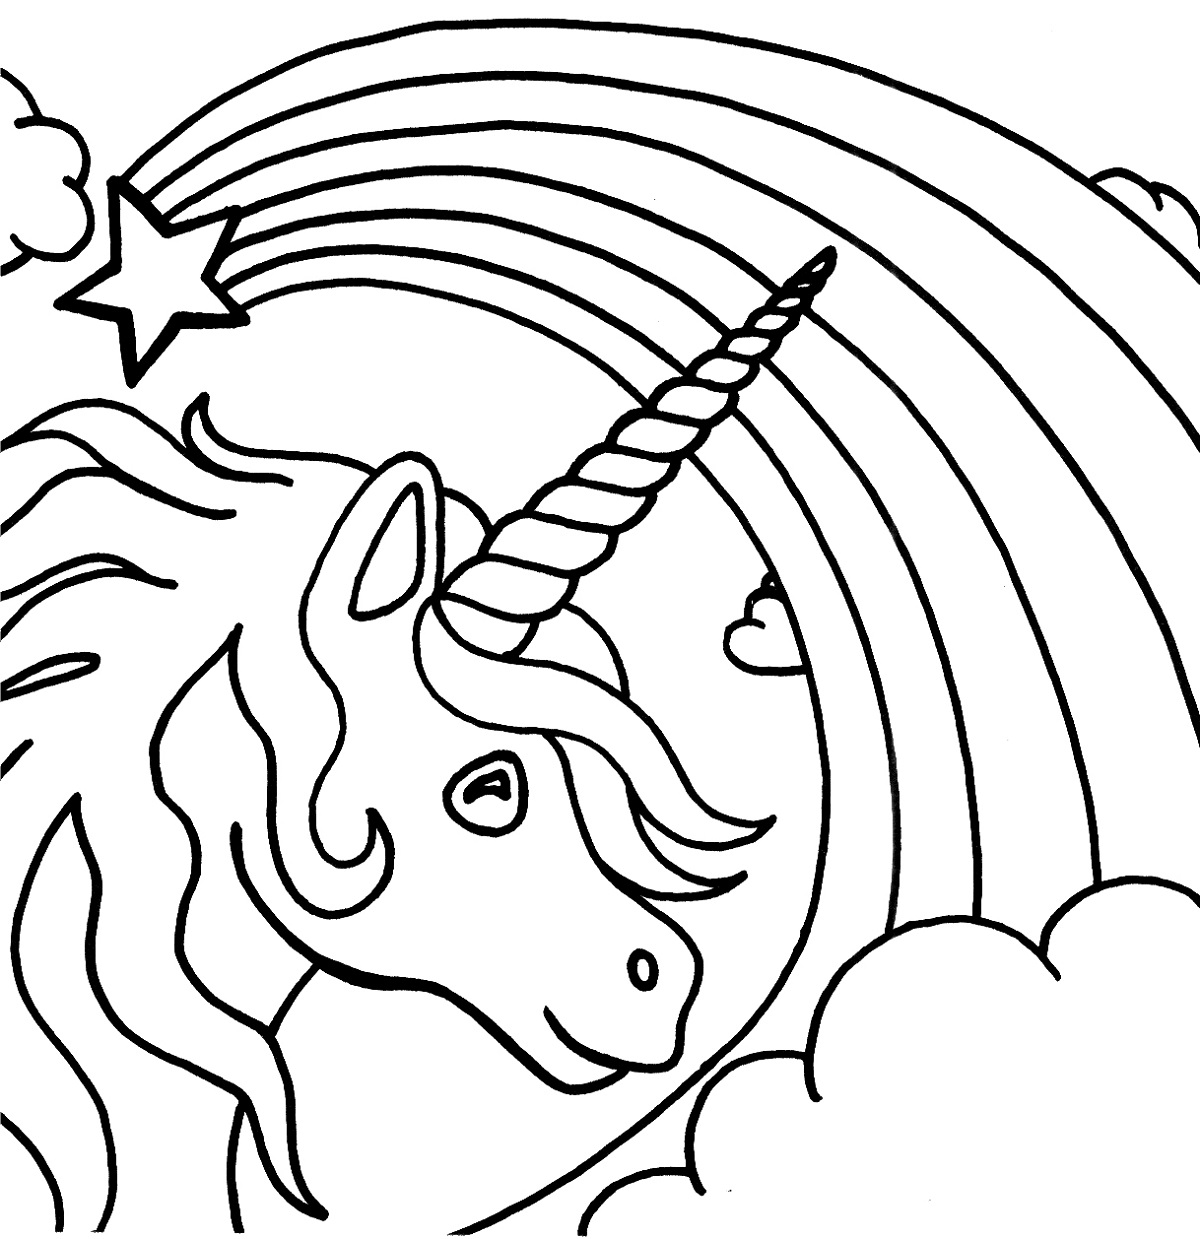 Free Childrens Colouring Pages to Print Unicorn